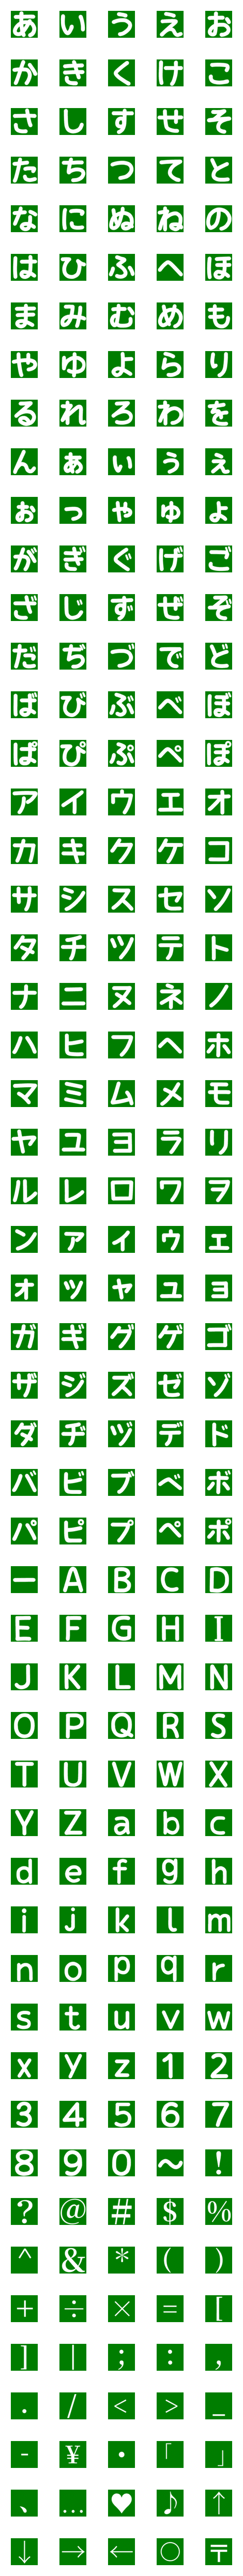 [LINE絵文字]スケスケ絵文字（緑）の画像一覧